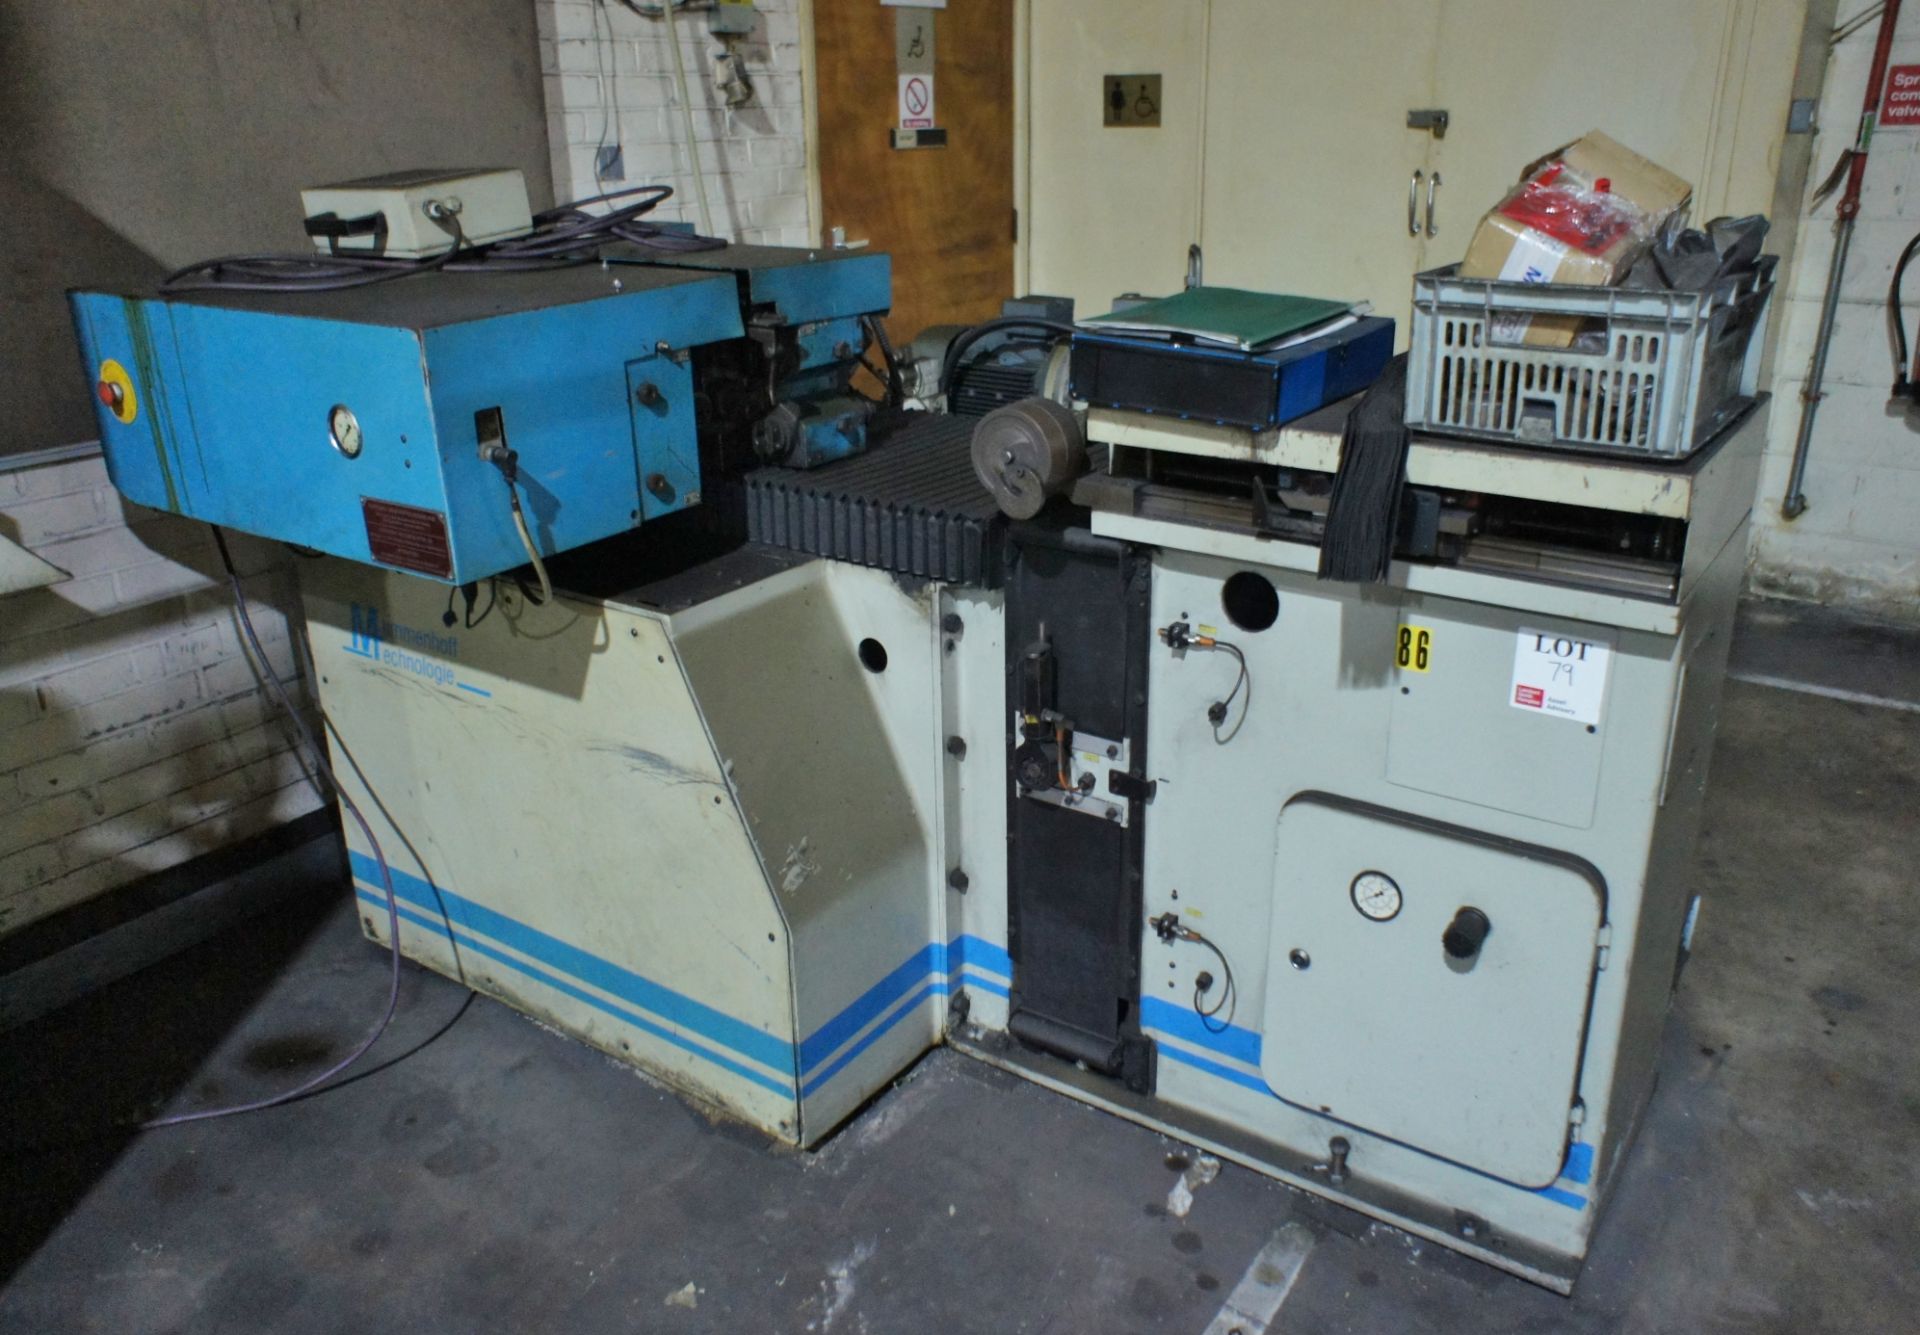 Mummenhoff Technologies PSR 700 automatic smithing and tensioning machine, Serial no. 10309 (2003)